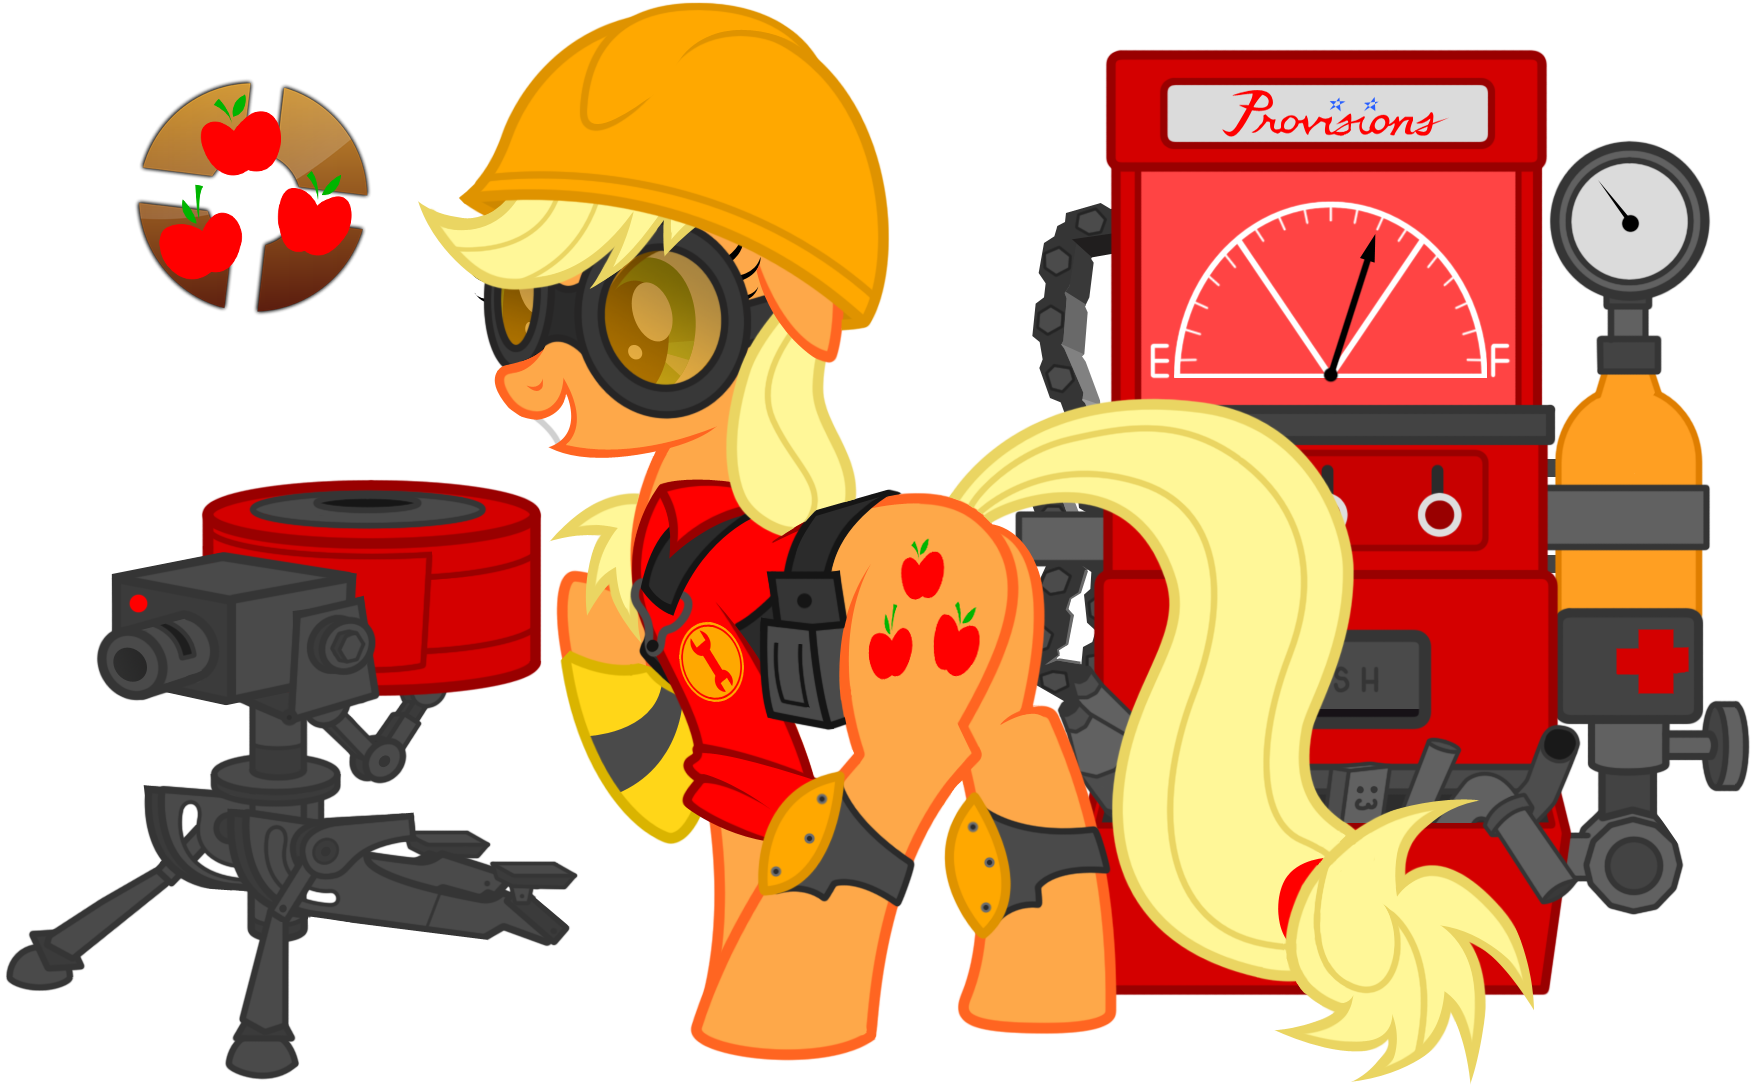 [Obrázek: red_engineer___applejack_by_nikkikitty44-d4pa4as.png]